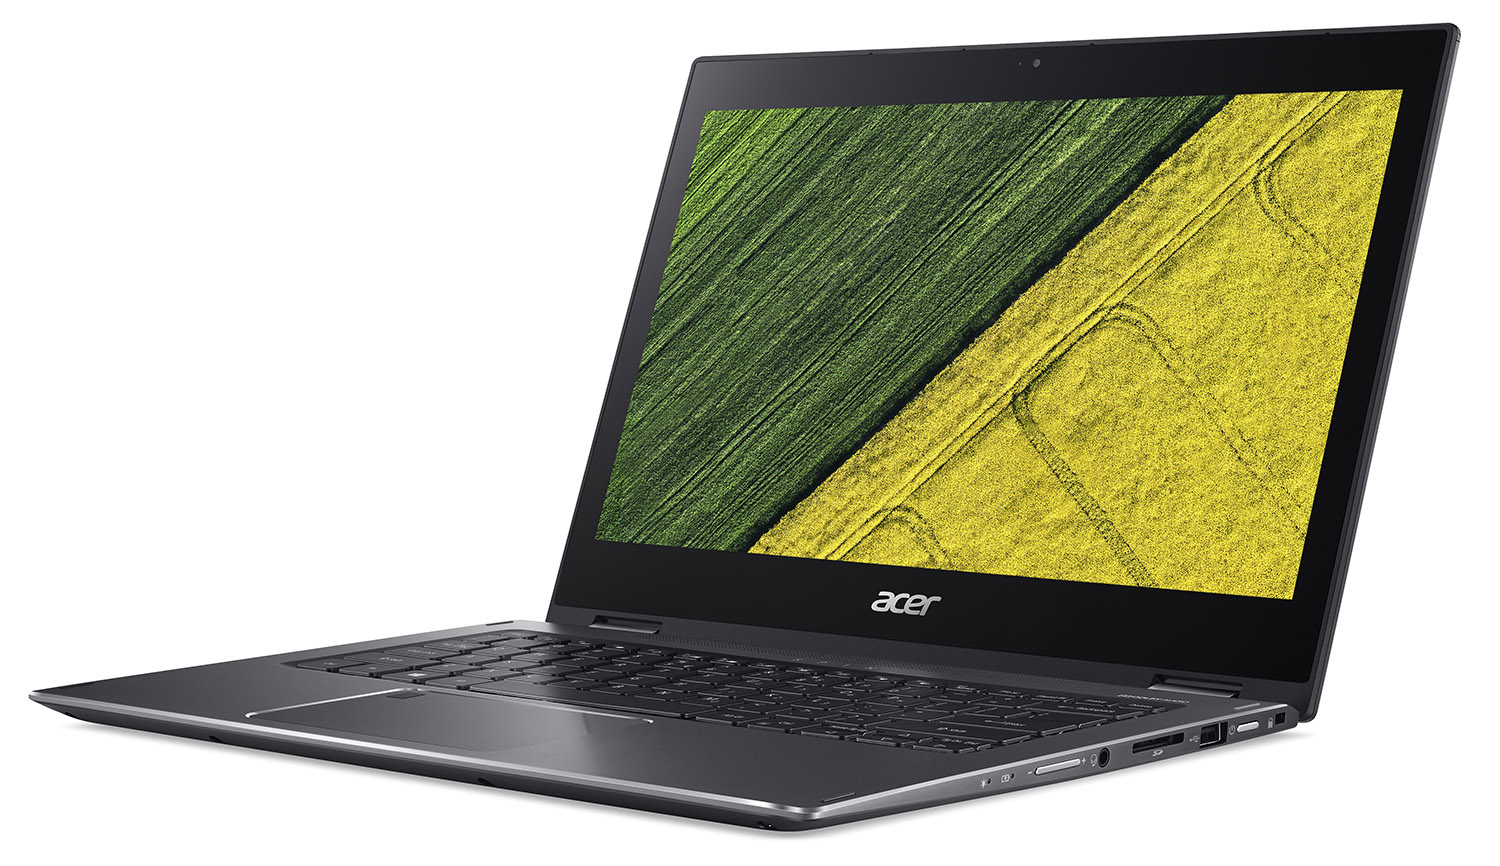 Acer puts a new spin into its notebook lineup